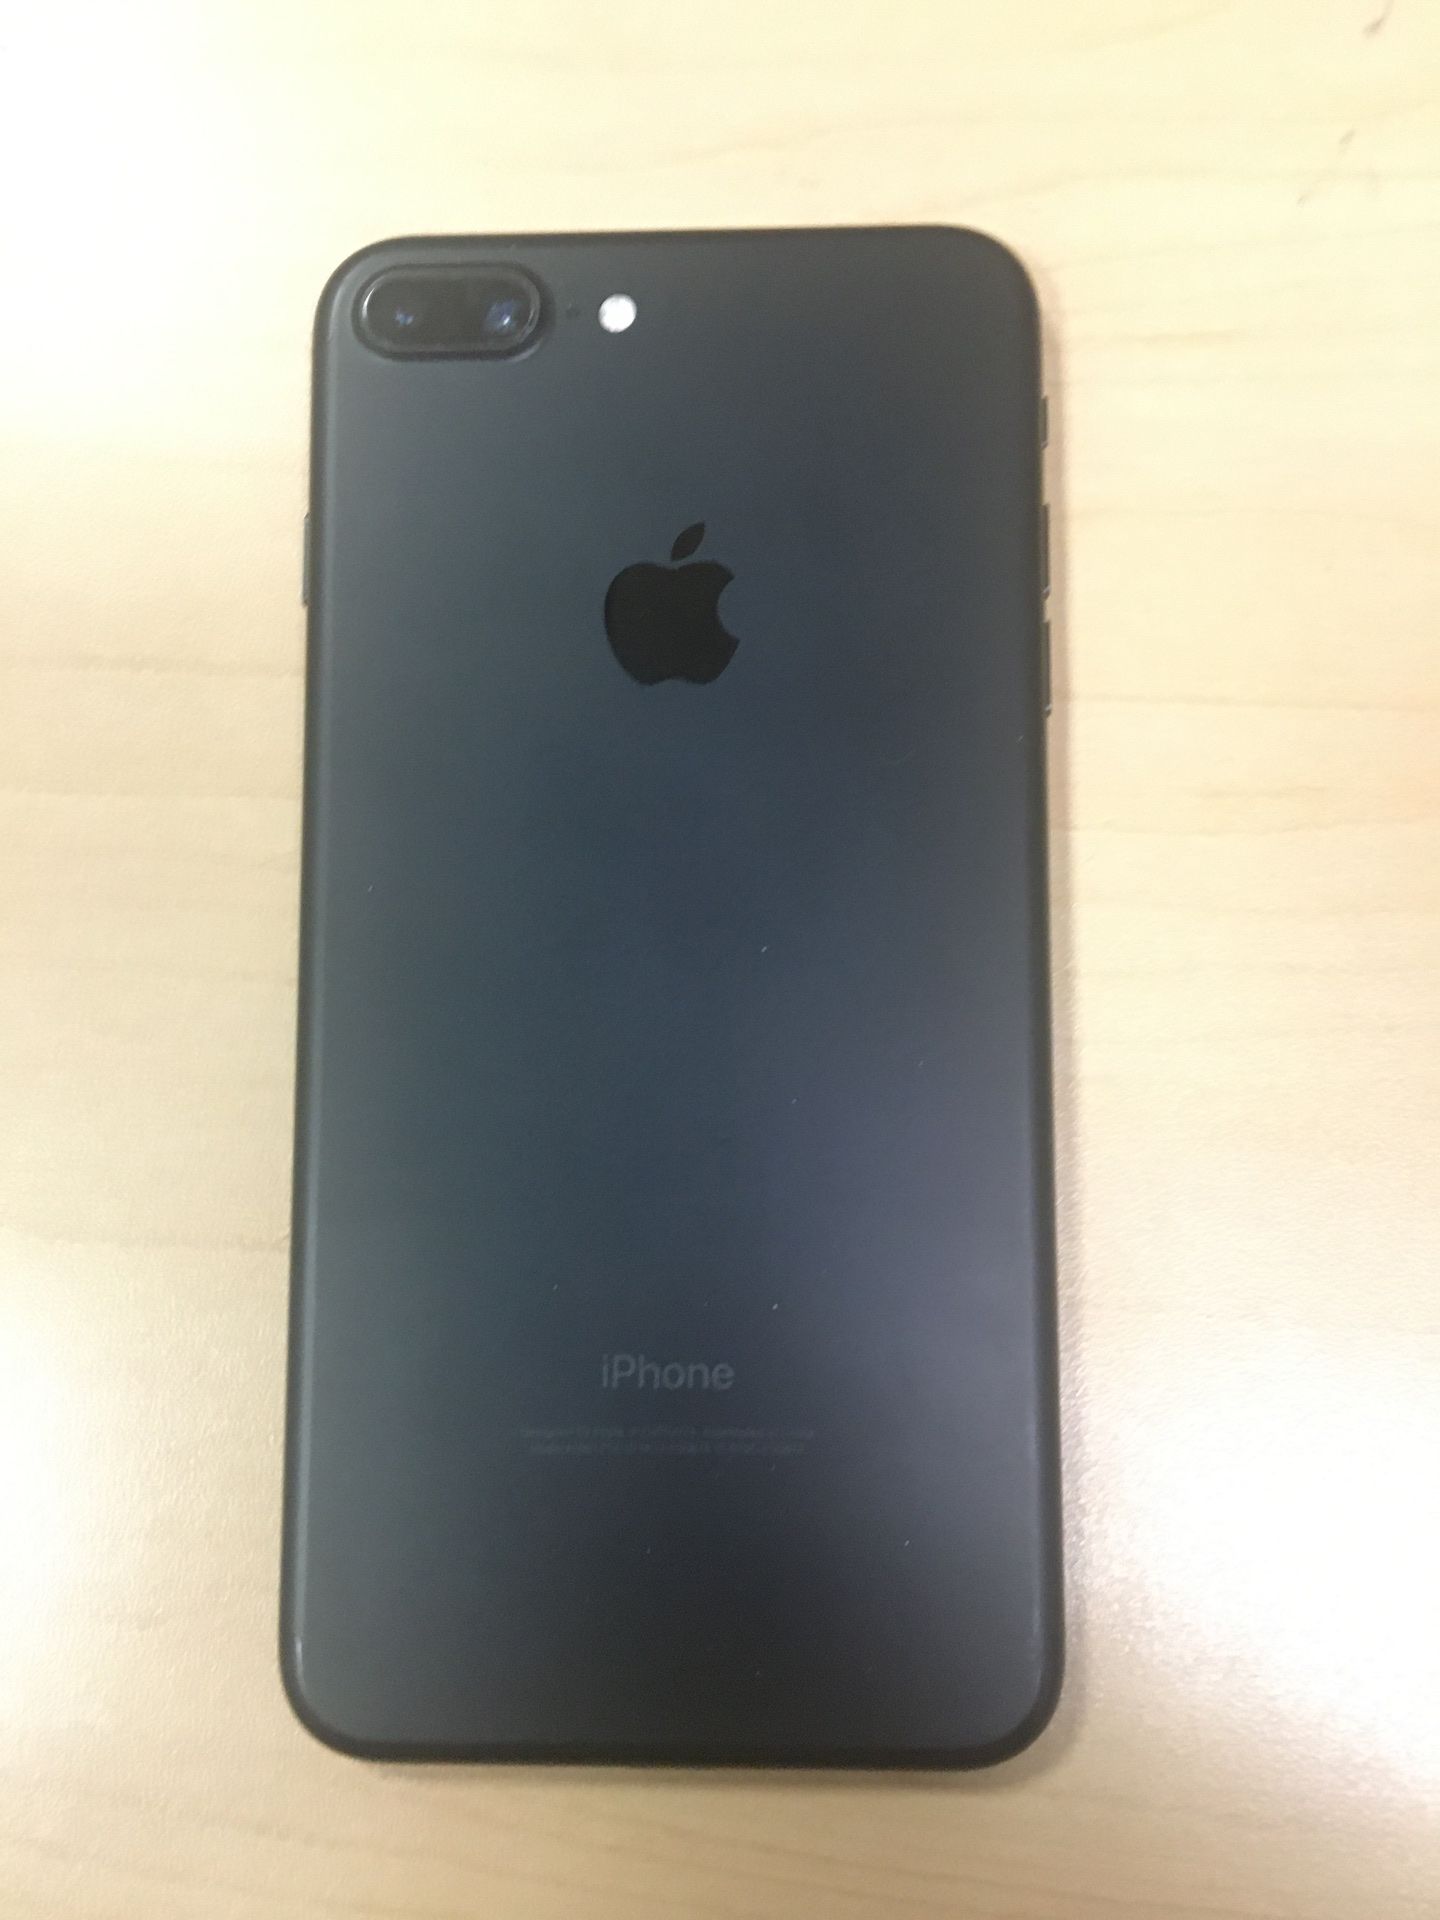 iPhone 7 Plus 32gb UNLOCKED with 6 months warranty